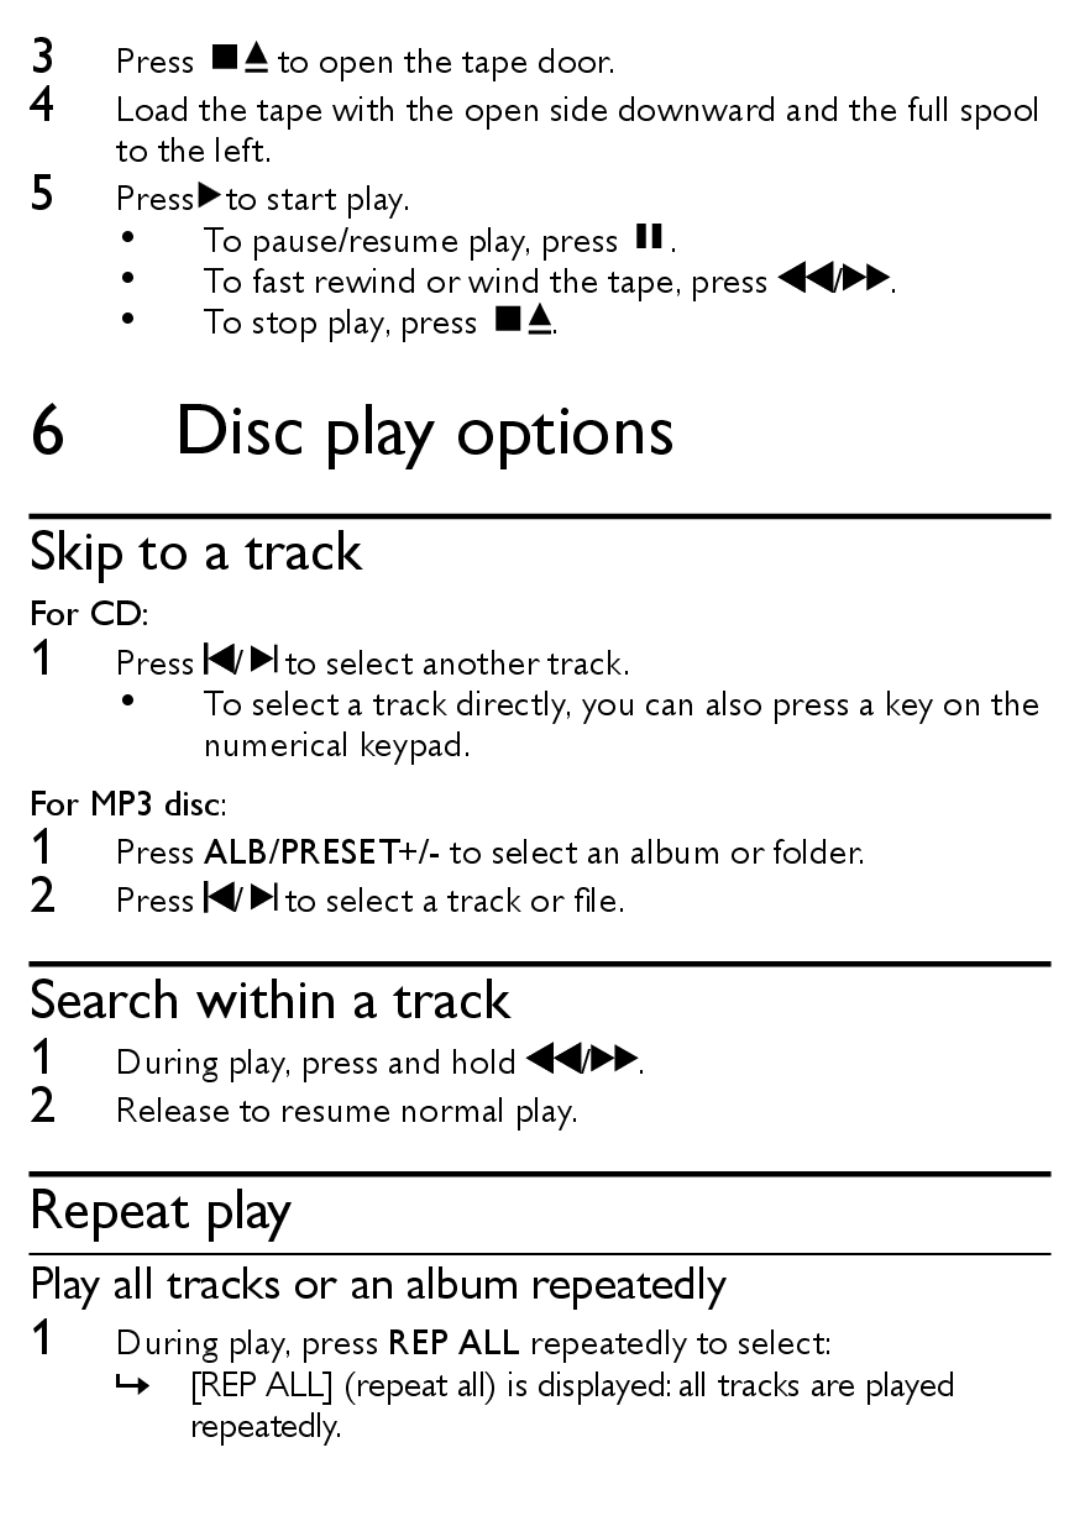 Philips MCM167 user manual 6Disc play options, Skip to a track, Search within a track, Repeat play 